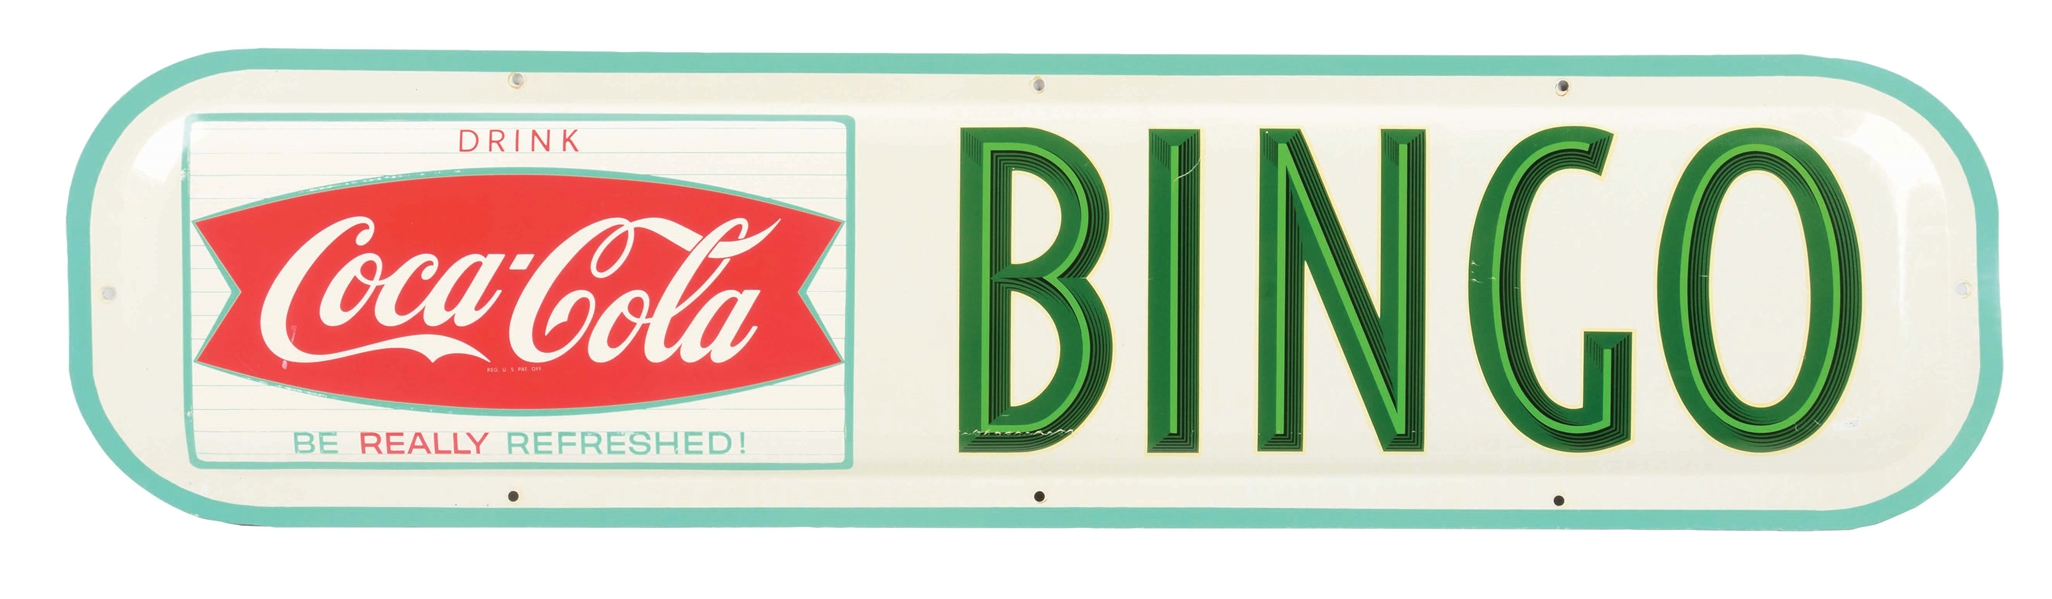 DRINK COCA COLA "BE REALLY REFRESHED" EMBOSSED TIN BINGO SIGN.